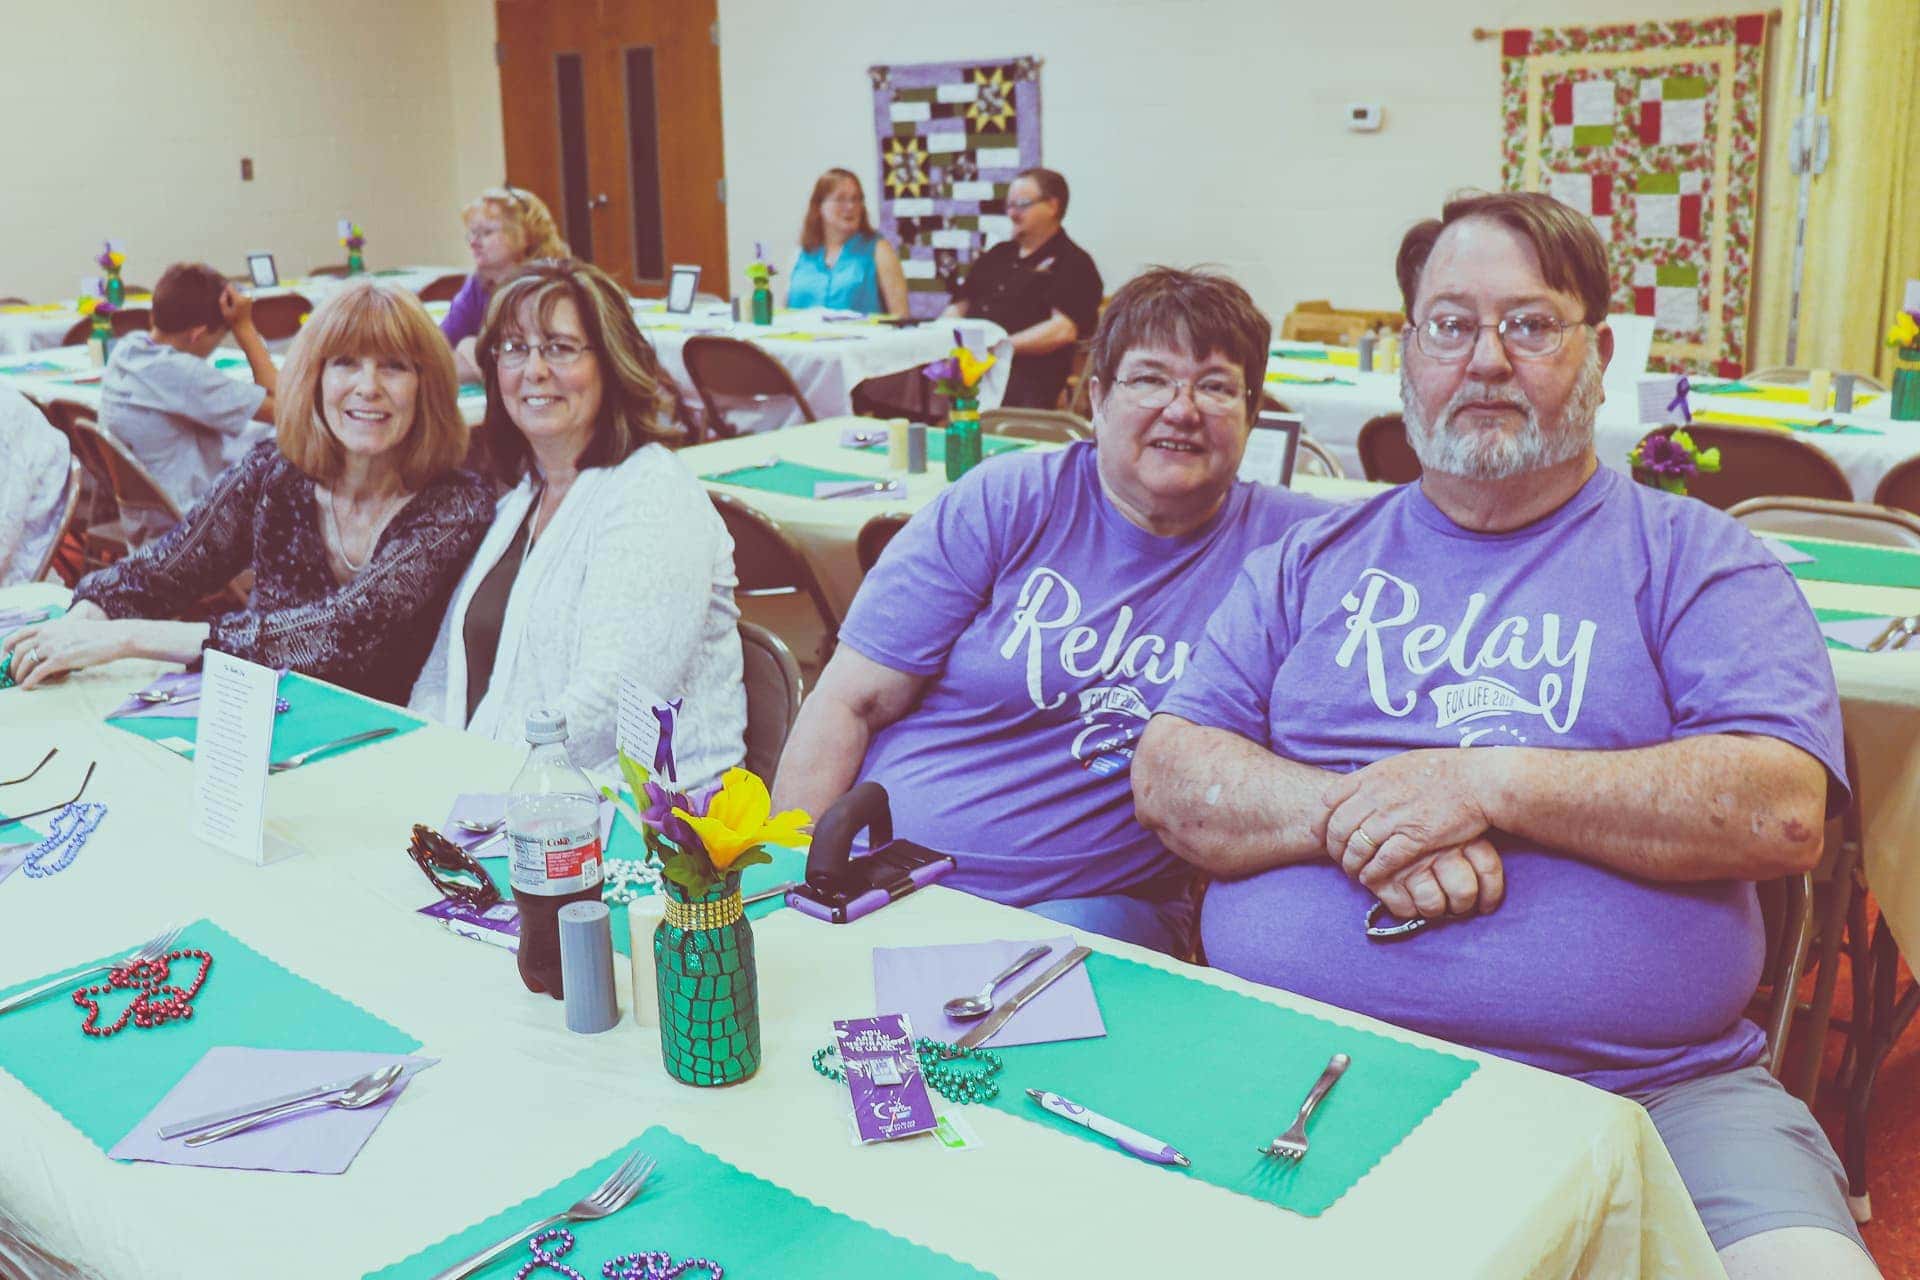 Upshur County Relay for Life